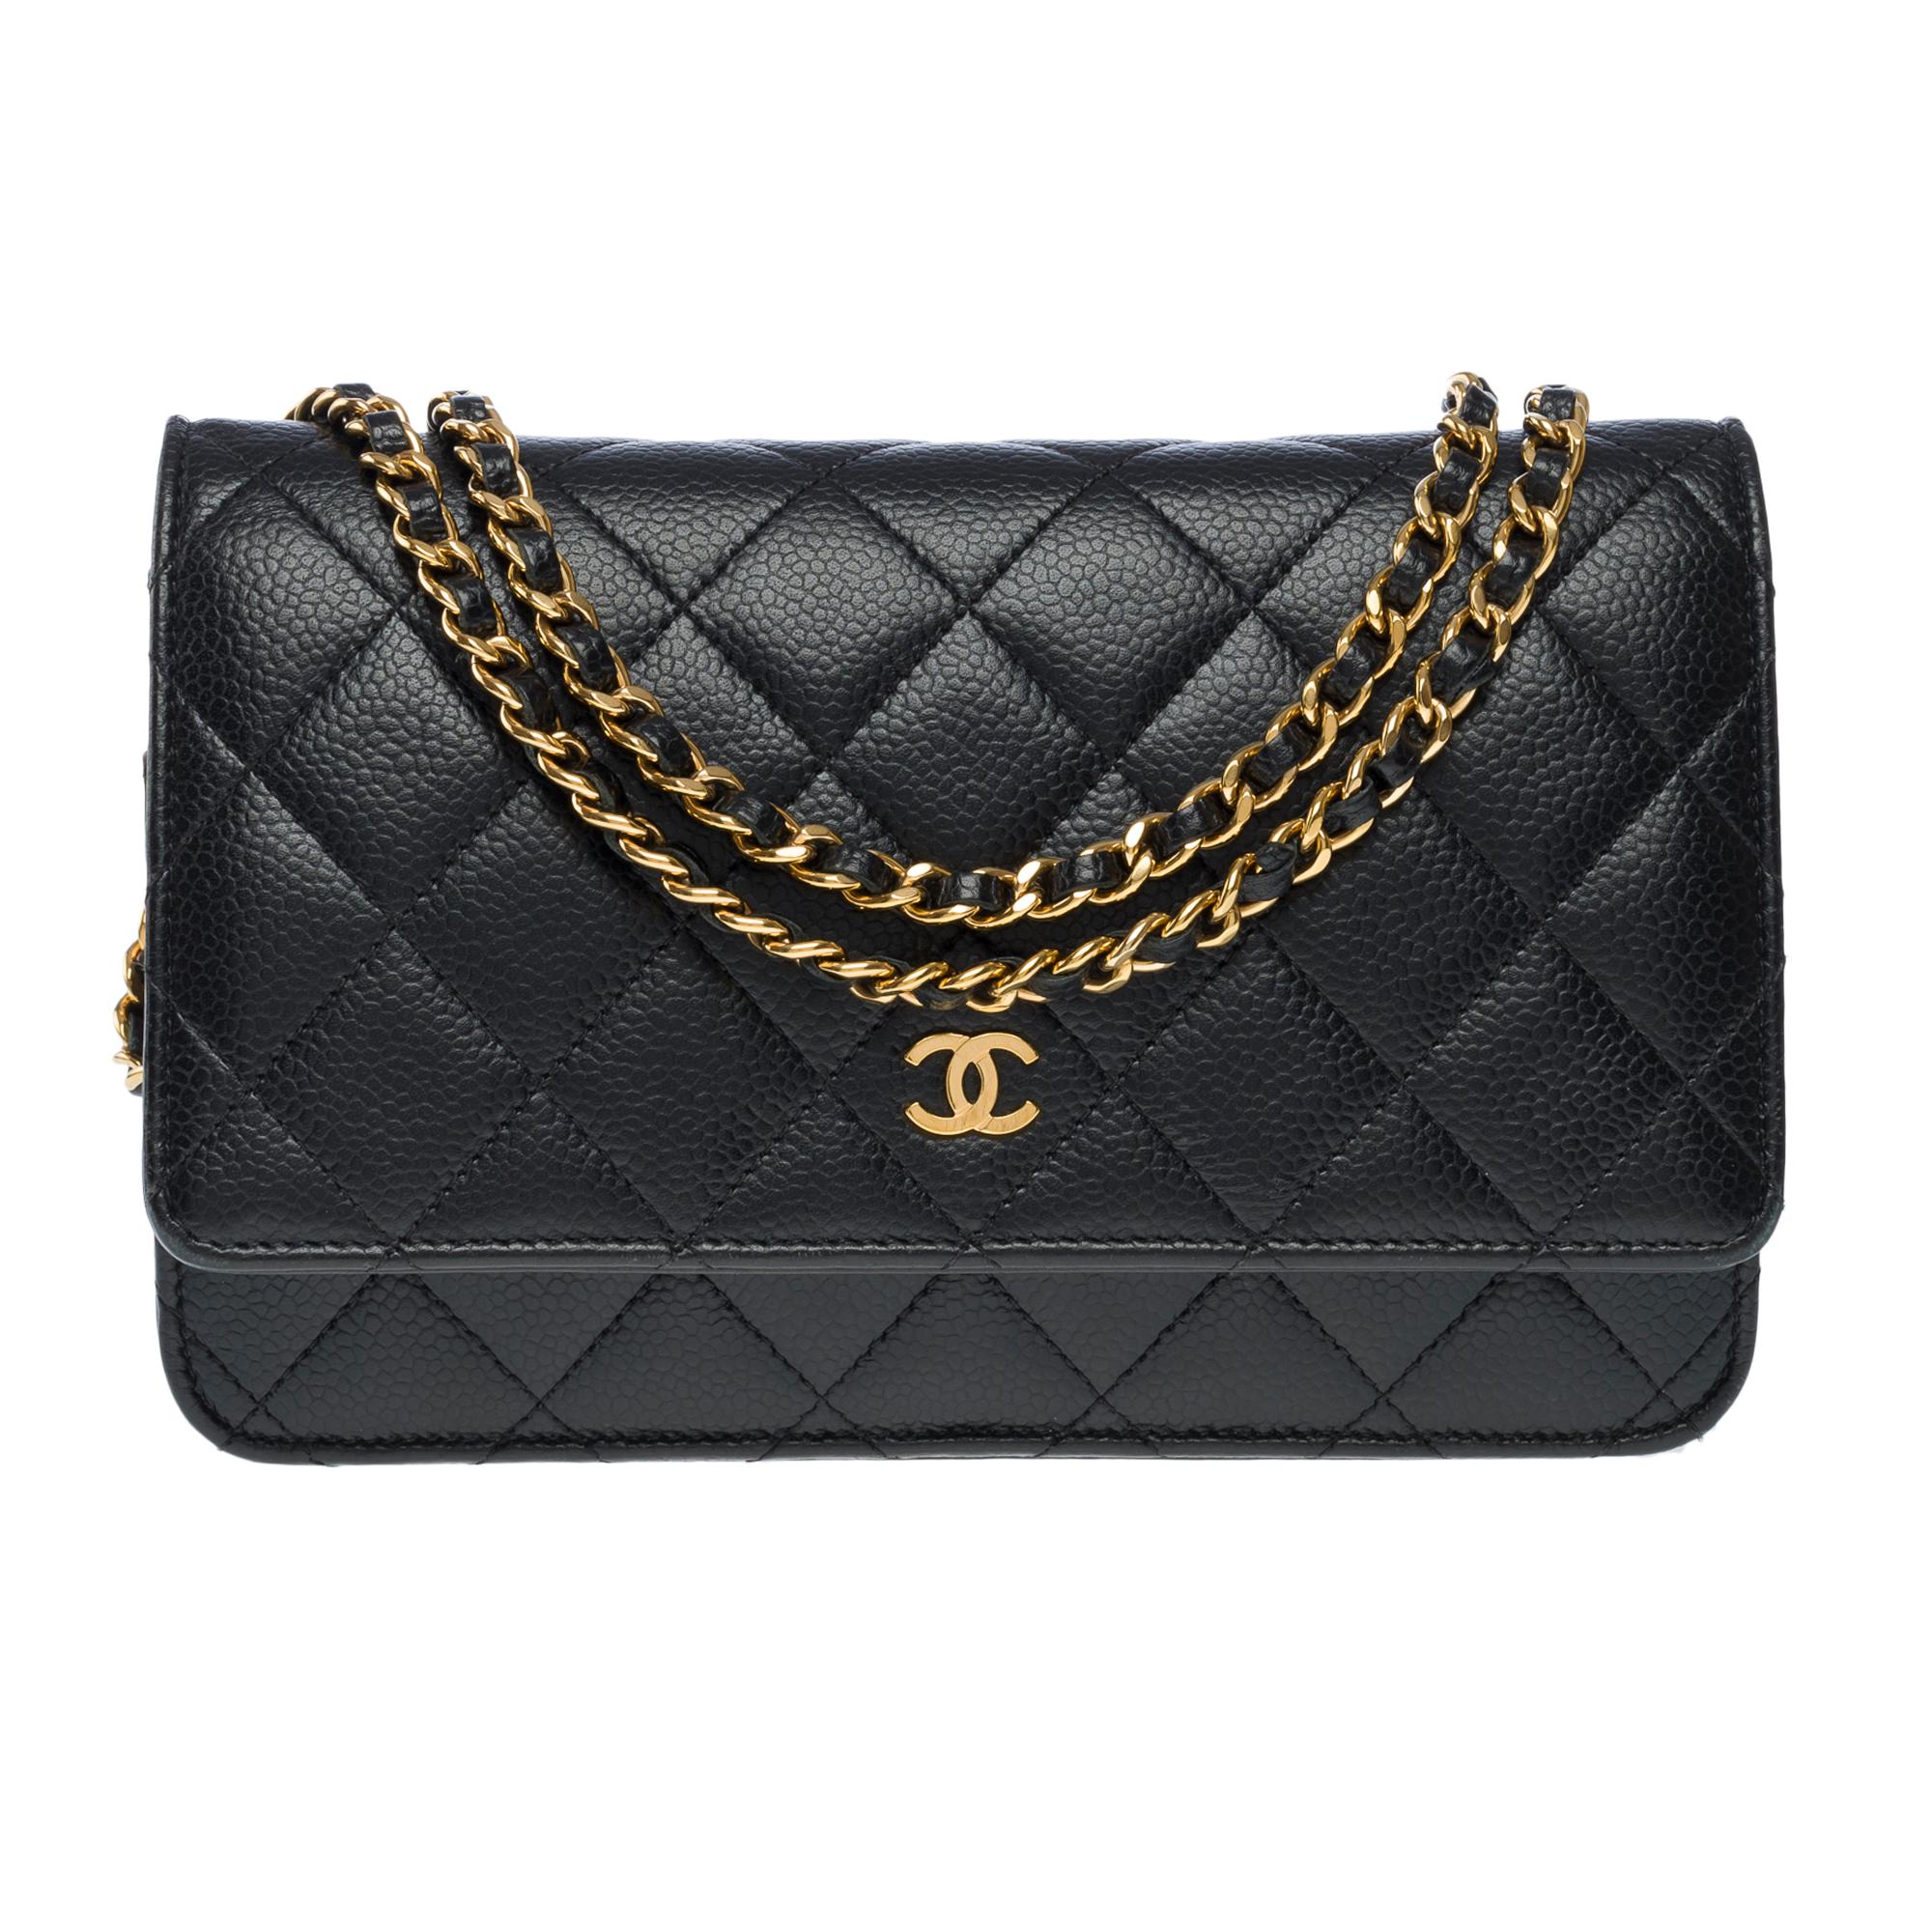 Lovely​​​ ​​​Chanel​​​ ​​​Wallet​​​ ​​​On​​​ ​​​Chain(WOC)​​​ ​​​shoulder​​​ ​​​bag​​​ ​​​​​​ ​​​in​​​ ​​​black​​​ ​​​quilted​​​ ​​​caviar​​​ ​​​leather,​​​ ​​​gold​​​ ​​​metal​​​ ​​​trim,​​​ ​​​a​​​ ​​​gold​​​ ​​​metal​​​ ​​​chain​​​ ​​​handle​​​